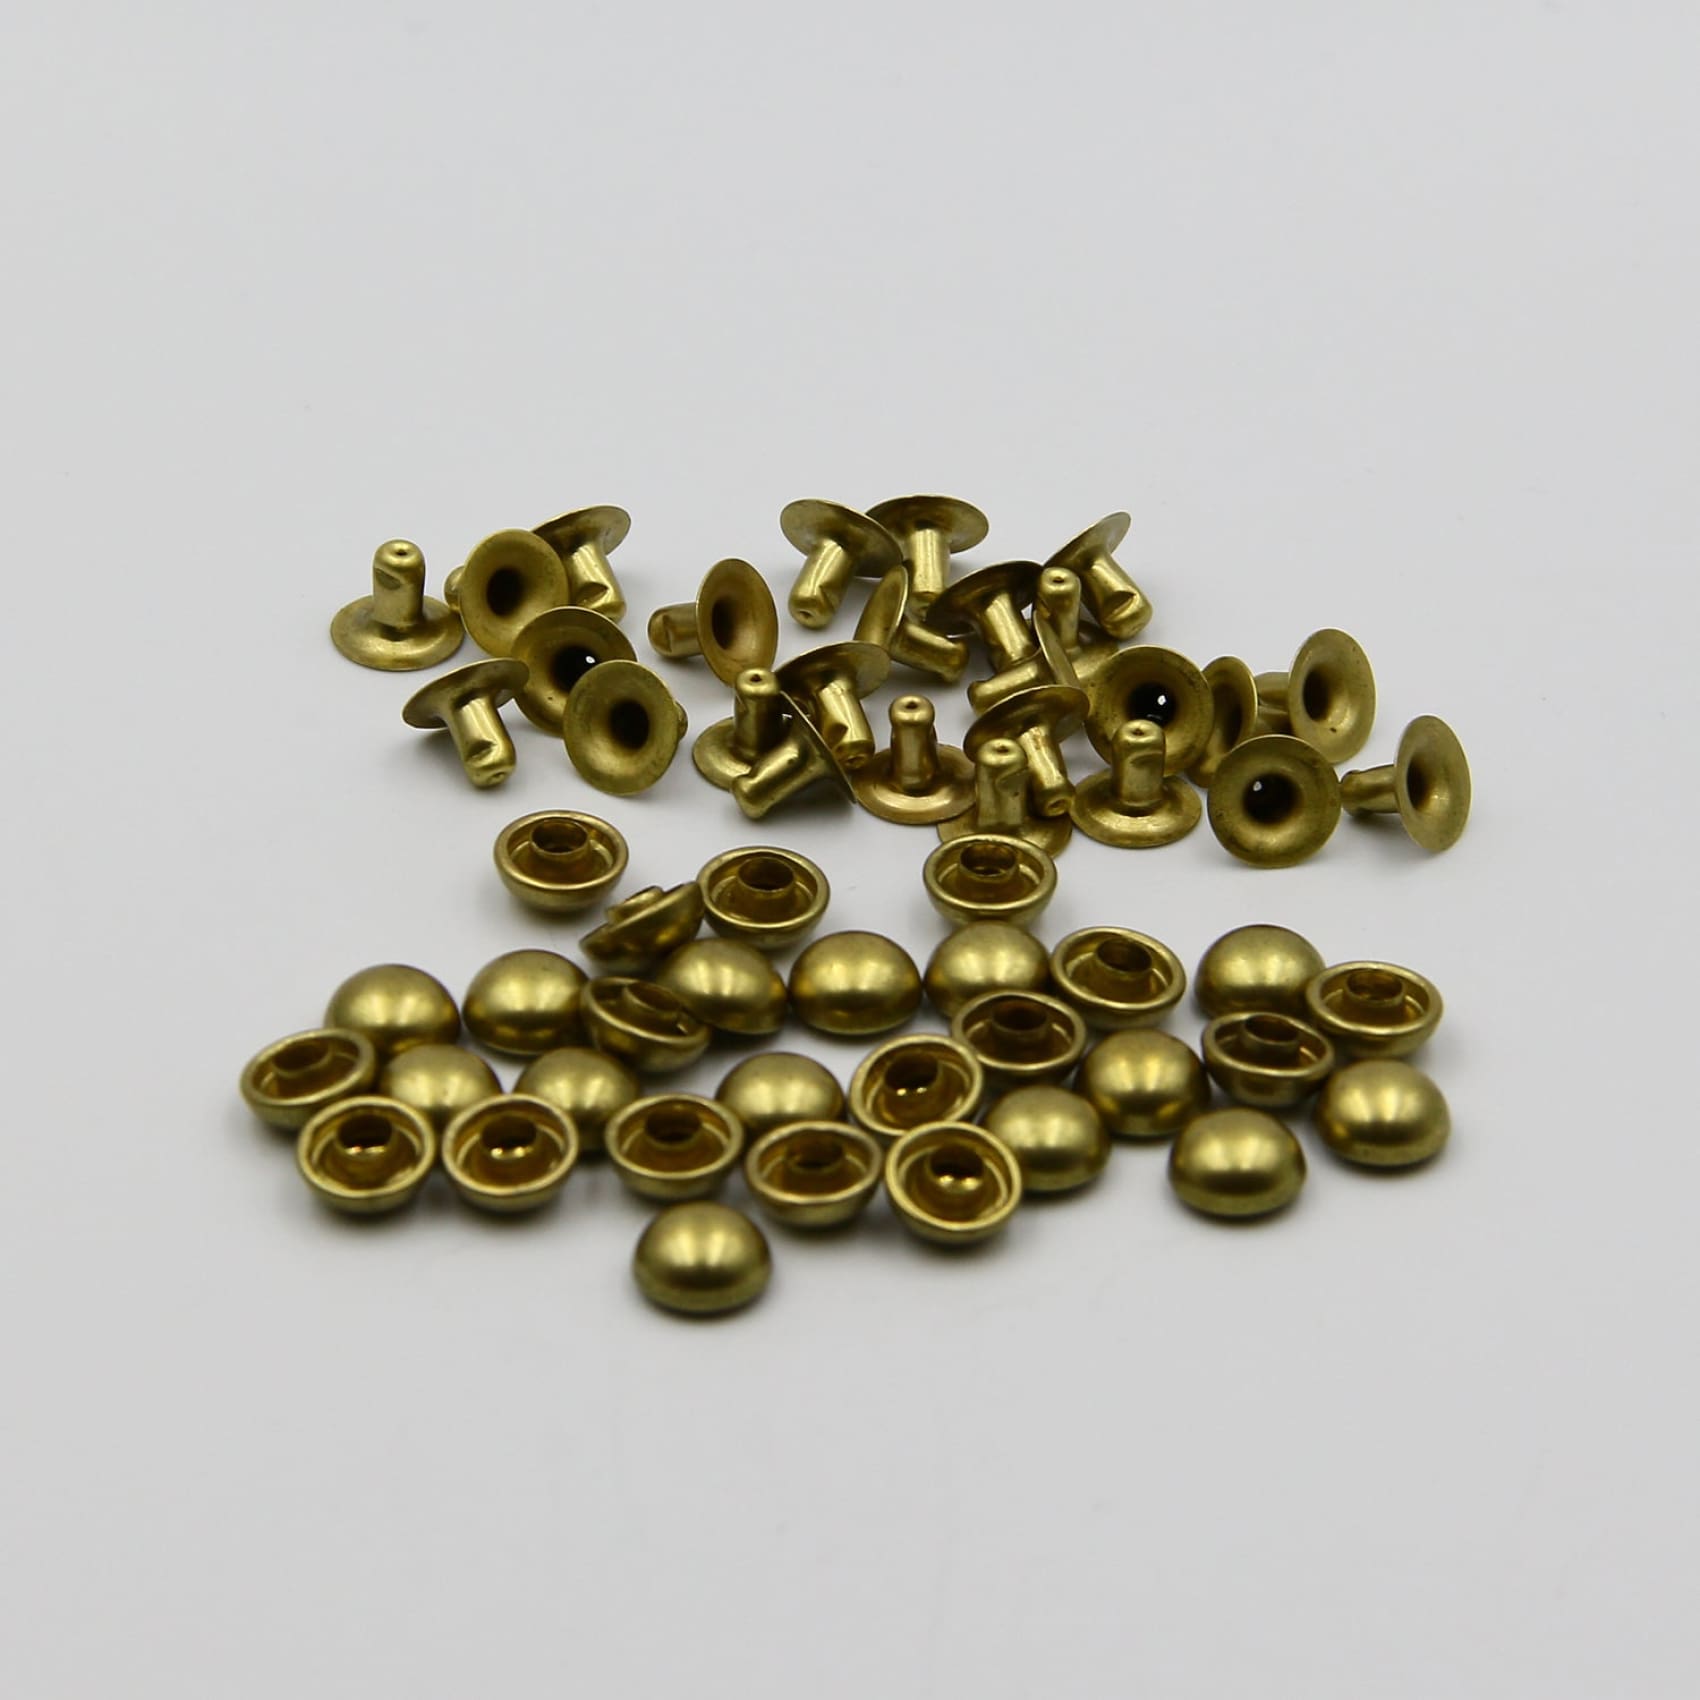 Brass Mushroom Stud&Rivets Snap Buttons for DIY Leather Crafts Repairs Decorations - Mushroom shape / 10pcs - Accessories